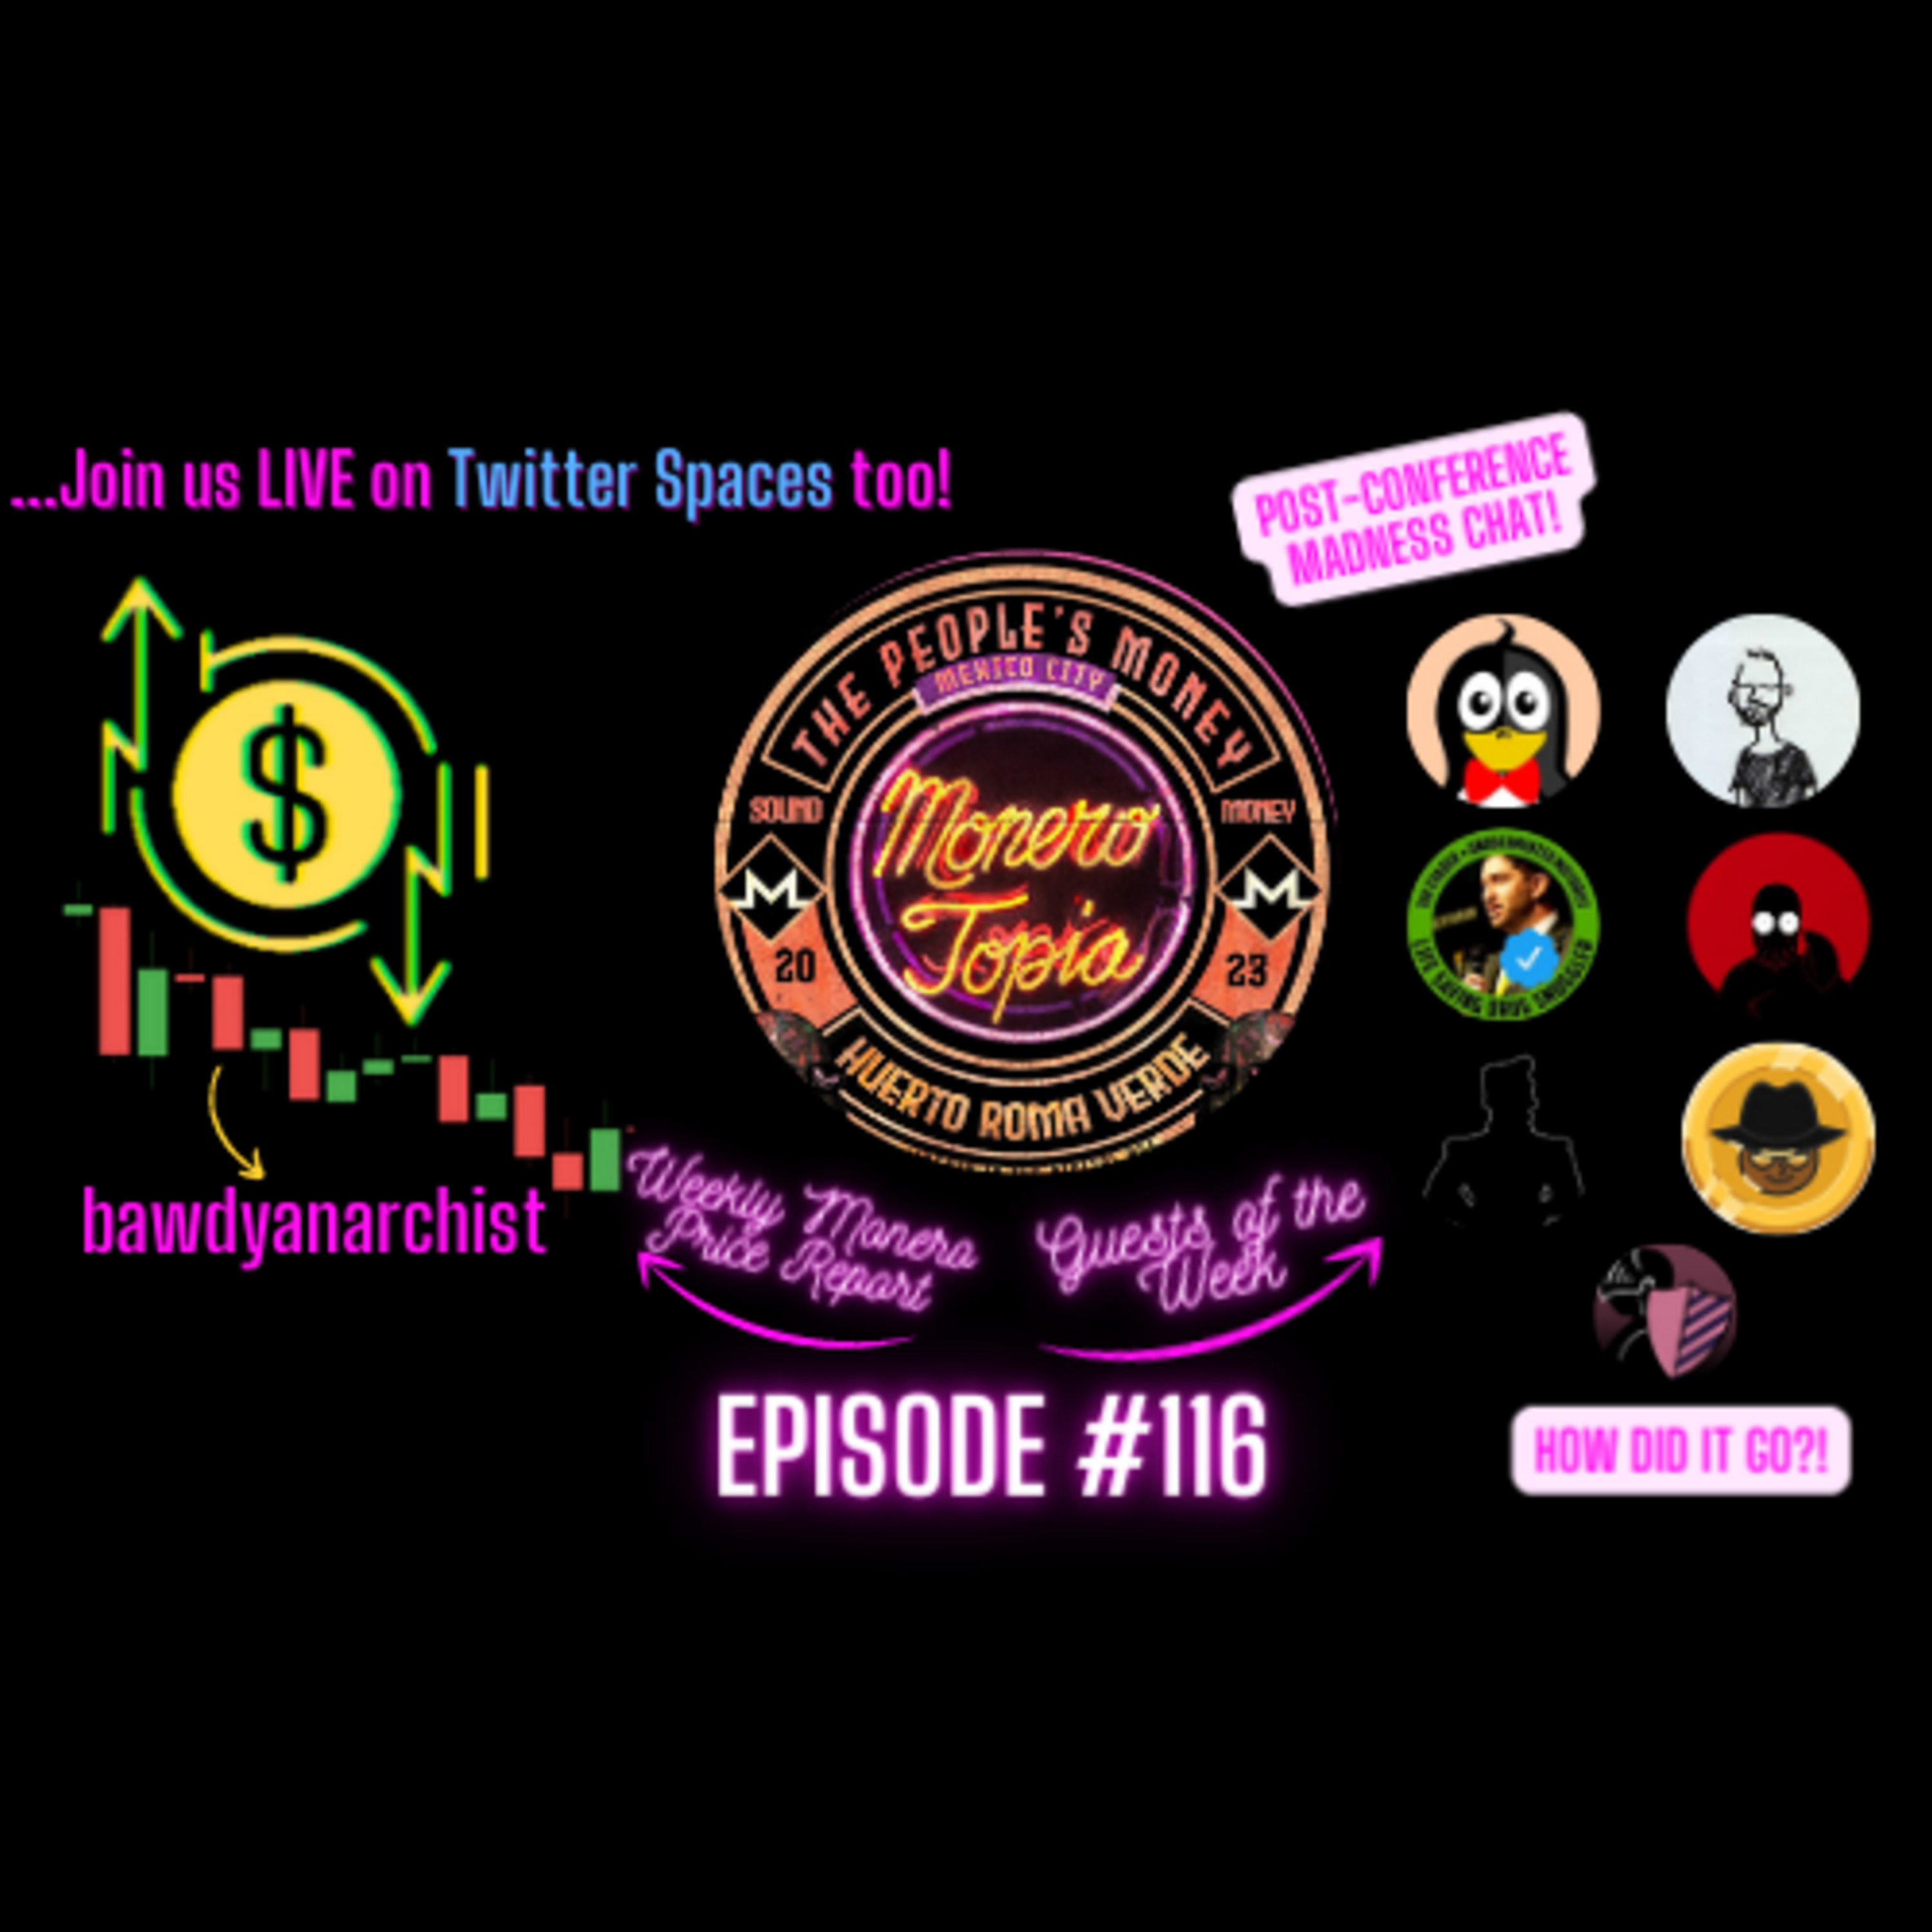 POST-Monerotopia23 Conference Madness Chat with the gang! Price Report, Dev and News! EPI #116